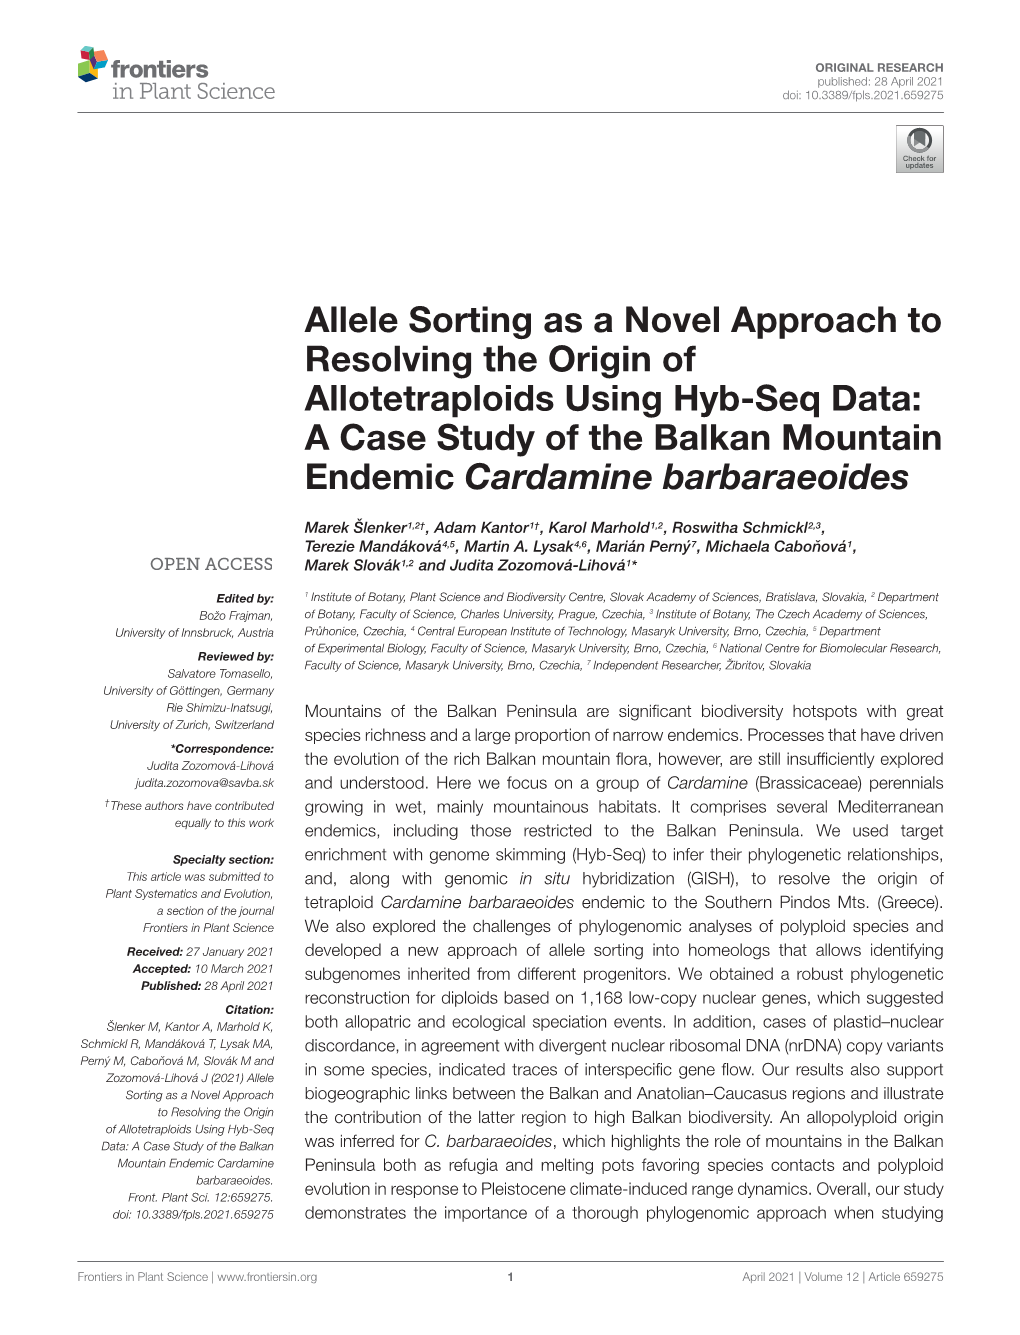 Allele Sorting As a Novel Approach to Resolving the Origin of Allotetraploids Using Hyb-Seq Data: a Case Study of the Balkan Mountain Endemic Cardamine Barbaraeoides